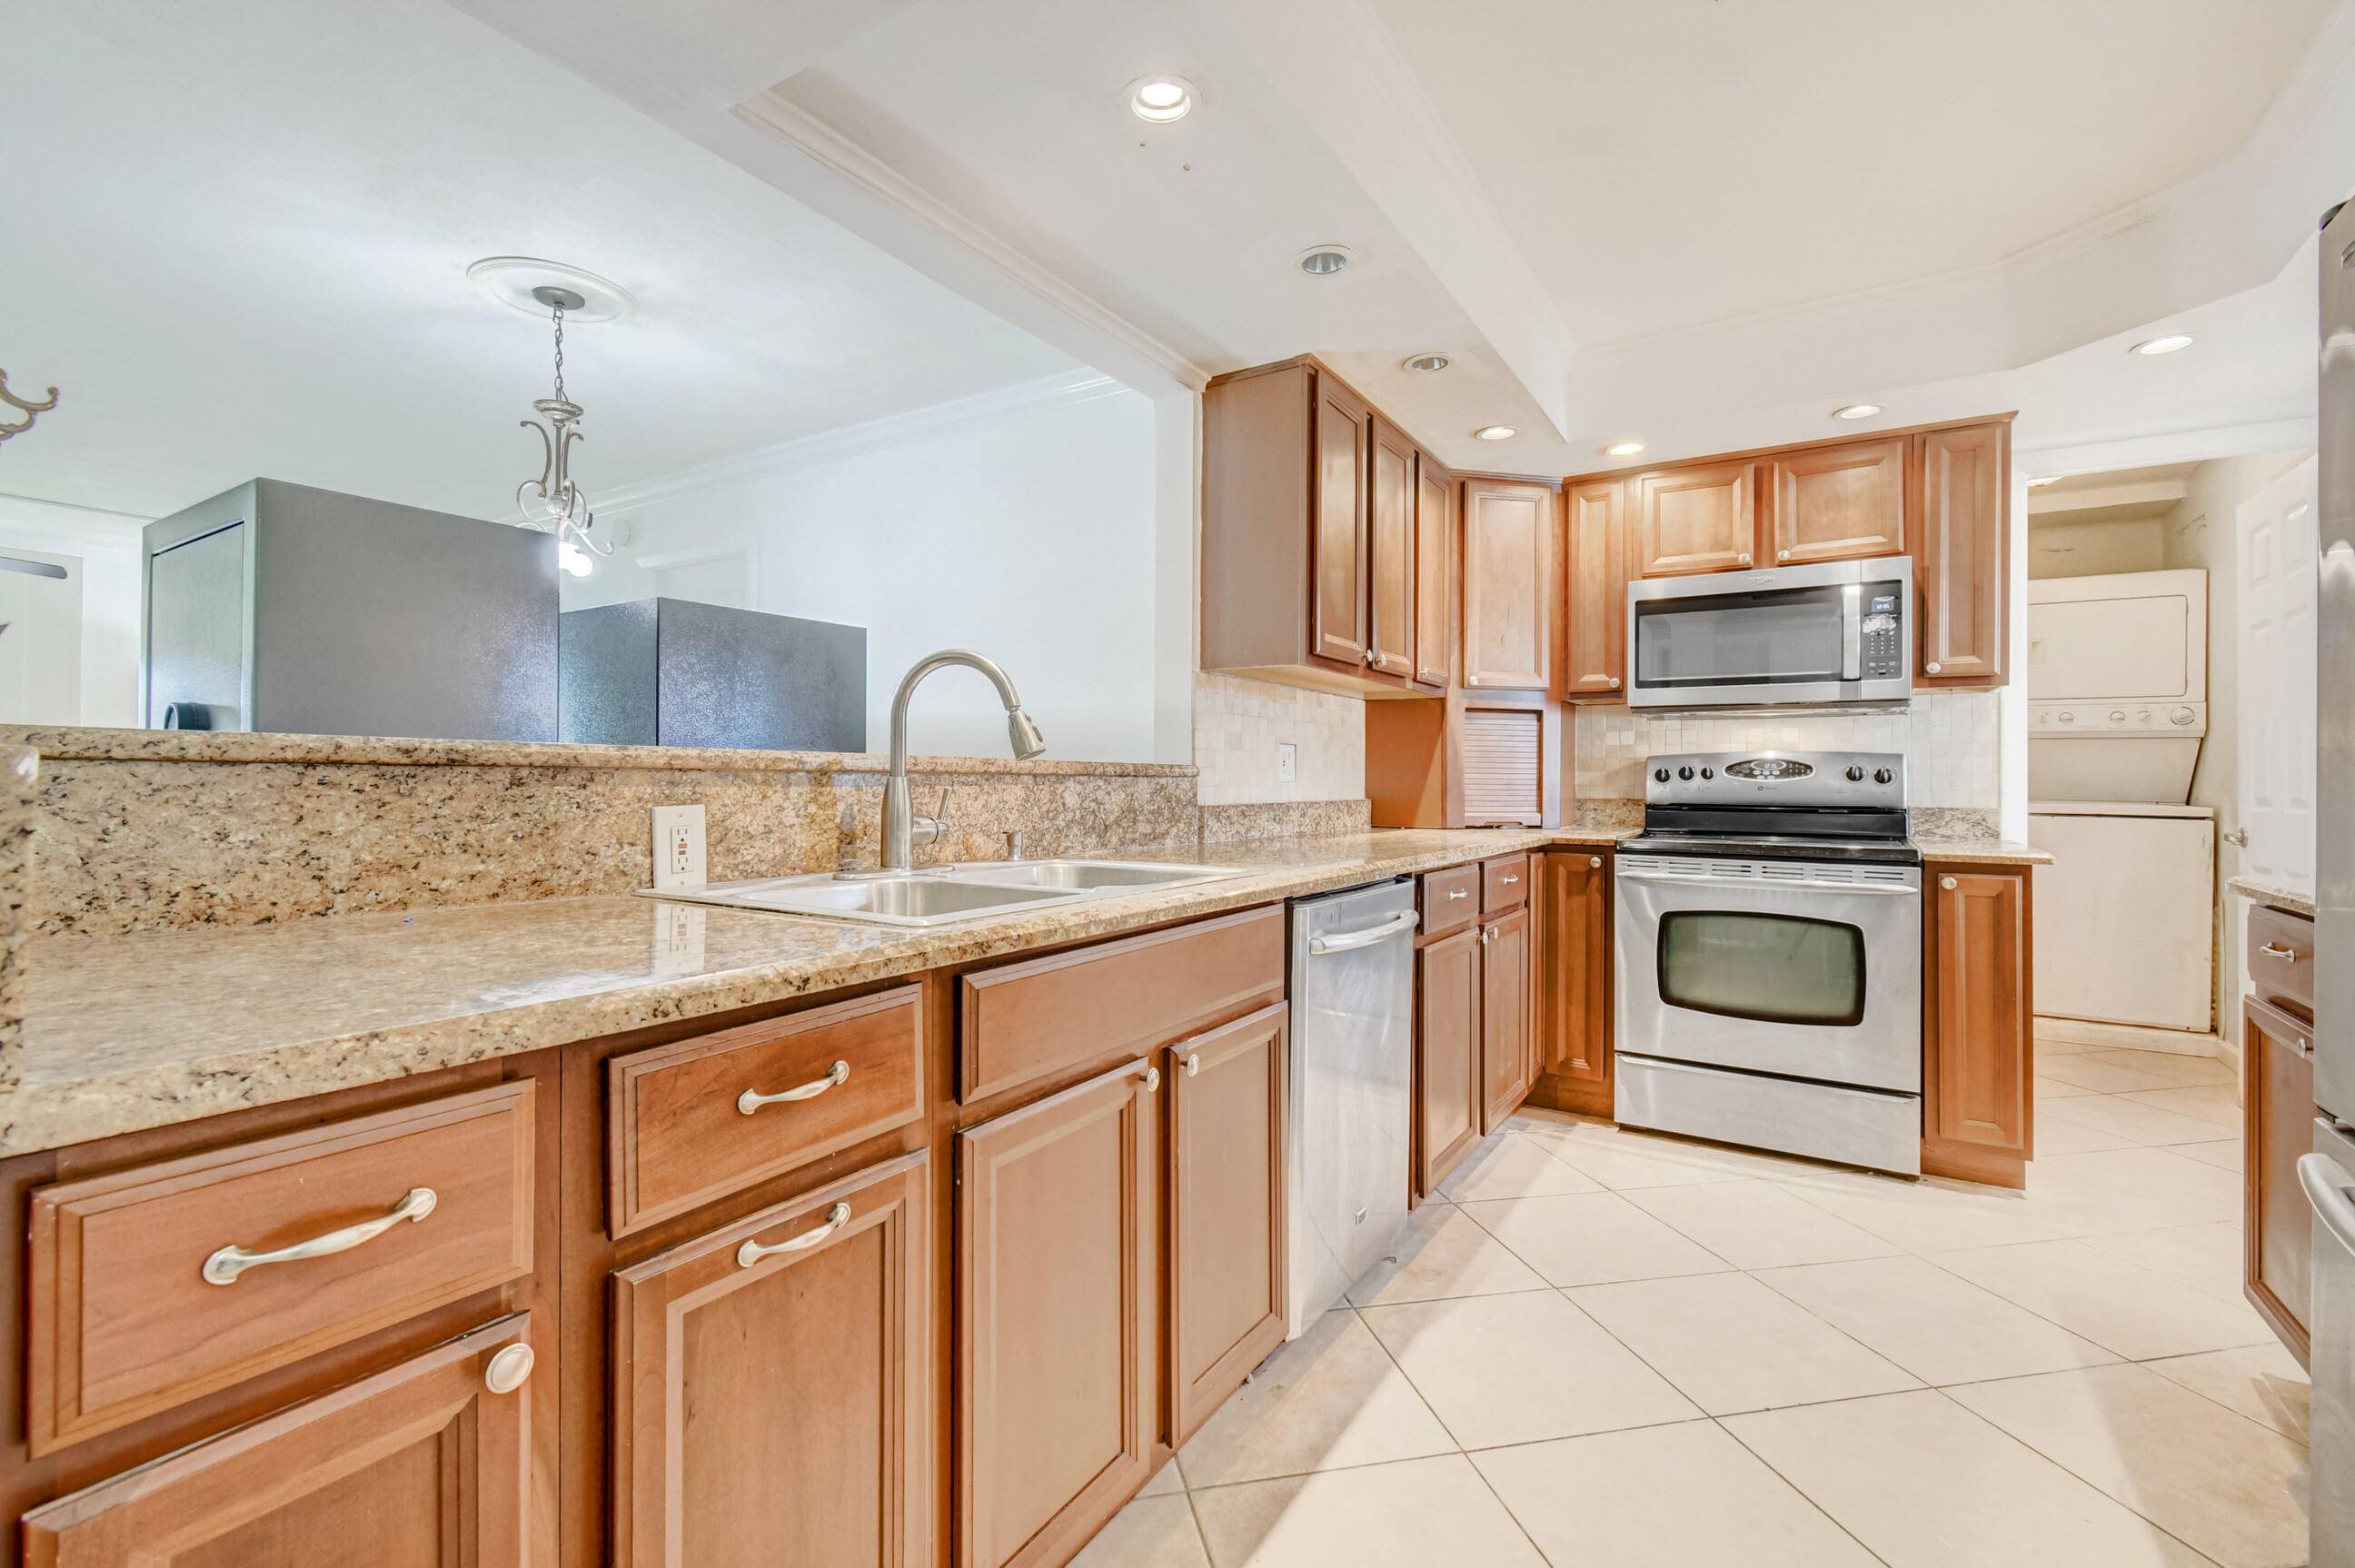 Welcome home to this Open and Spacious Ground Floor 3BDR 2 BATH unit featuring new luxury vinyl flooring and crown molding throughout, large enclosed porch with expansive garden view, nestled ...